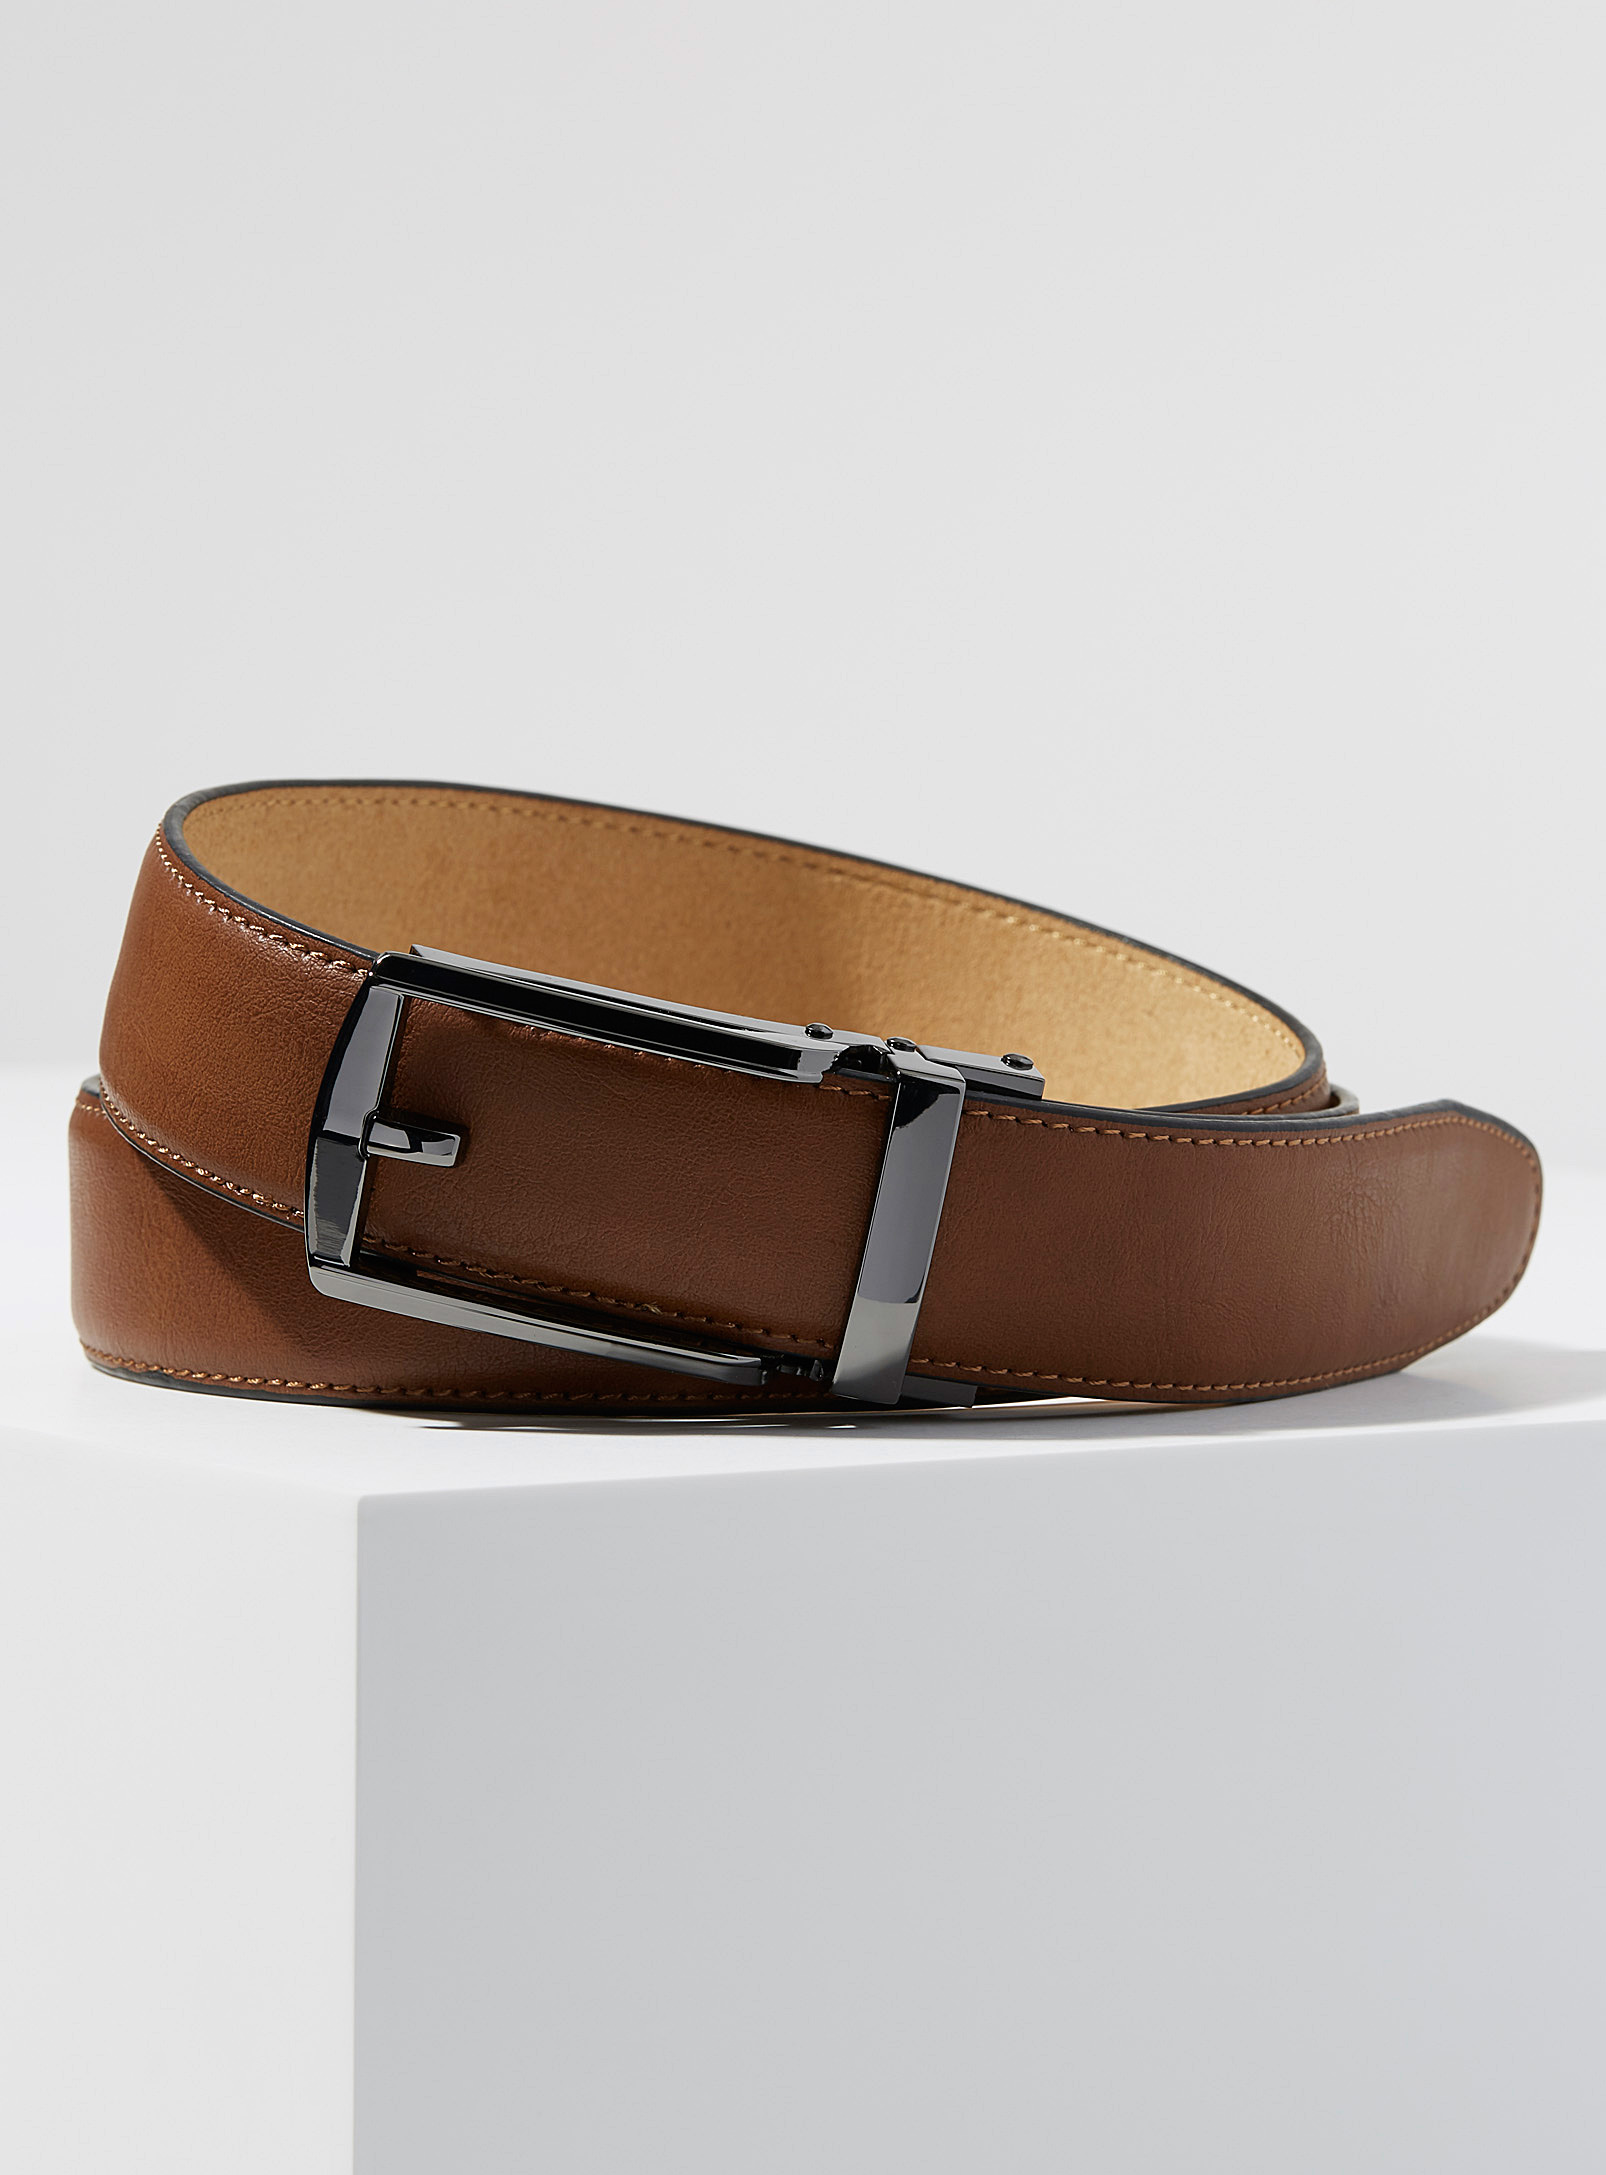 Le 31 Openwork Buckle Automatic Belt In Fawn